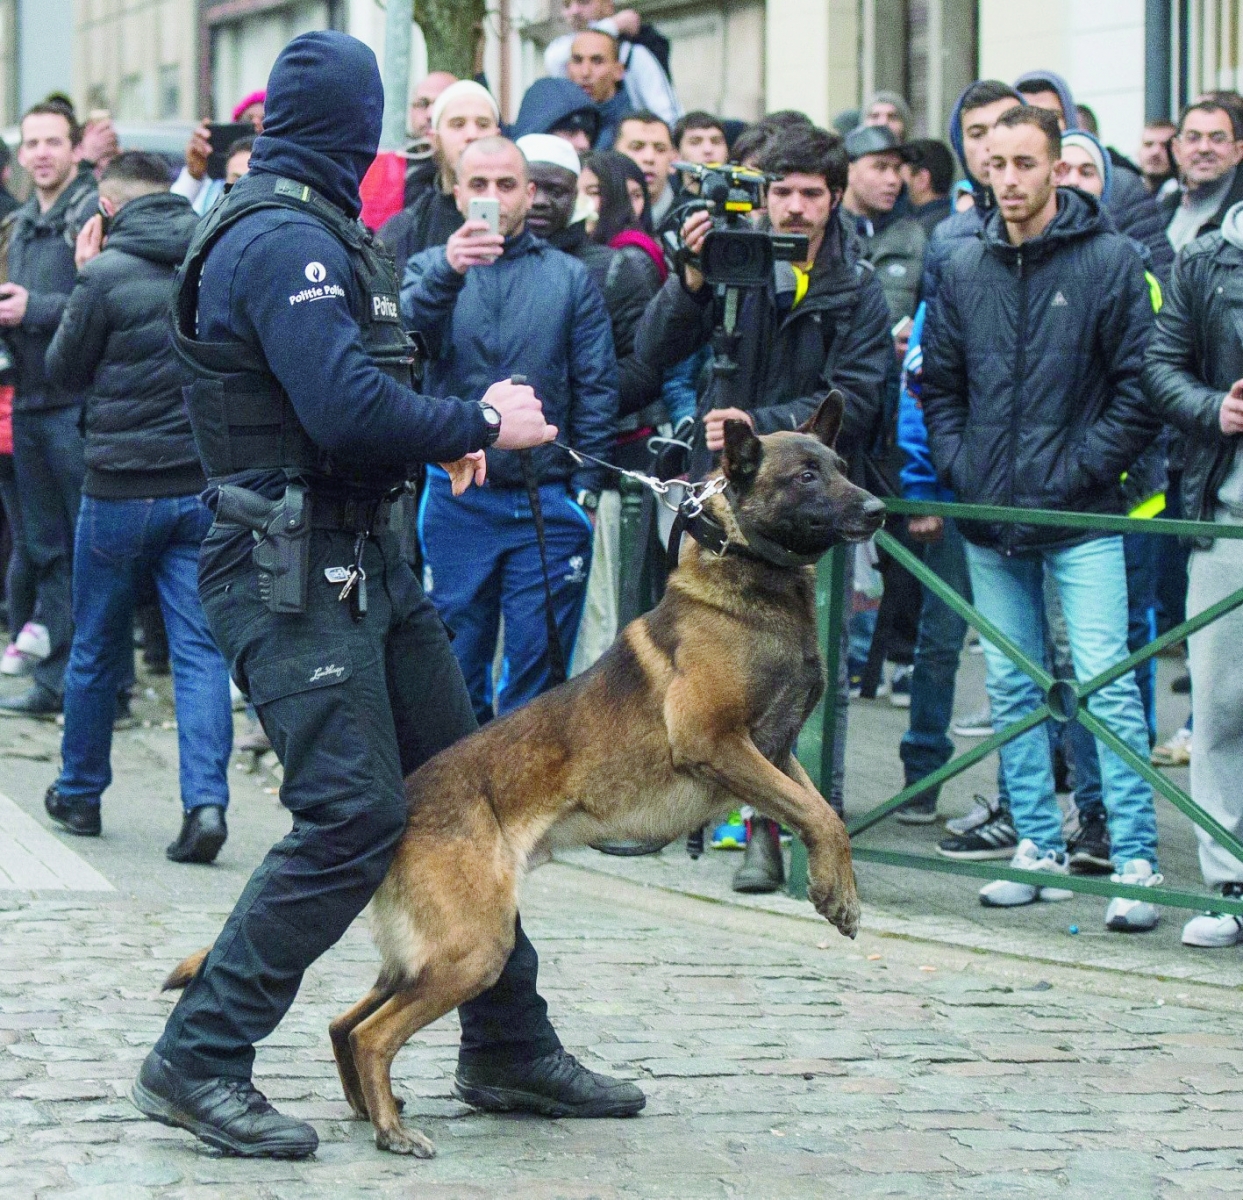 epa05218780 A Belgian police dog handler holds back curious onlookers during an anti-terror operation in the Molenbeek neighborhood of Brussels, Belgium, 18 March 2016. Media reports claim that fugitive terror suspect Salah Abdeslam has been wounded but arrested alive during the anti-terror operation in Molenbeek that was carried out within the investigations linked to last year's Paris terror attacks.  EPA/STEPHANIE LECOCQ BELGIUM TERRORIST RAID